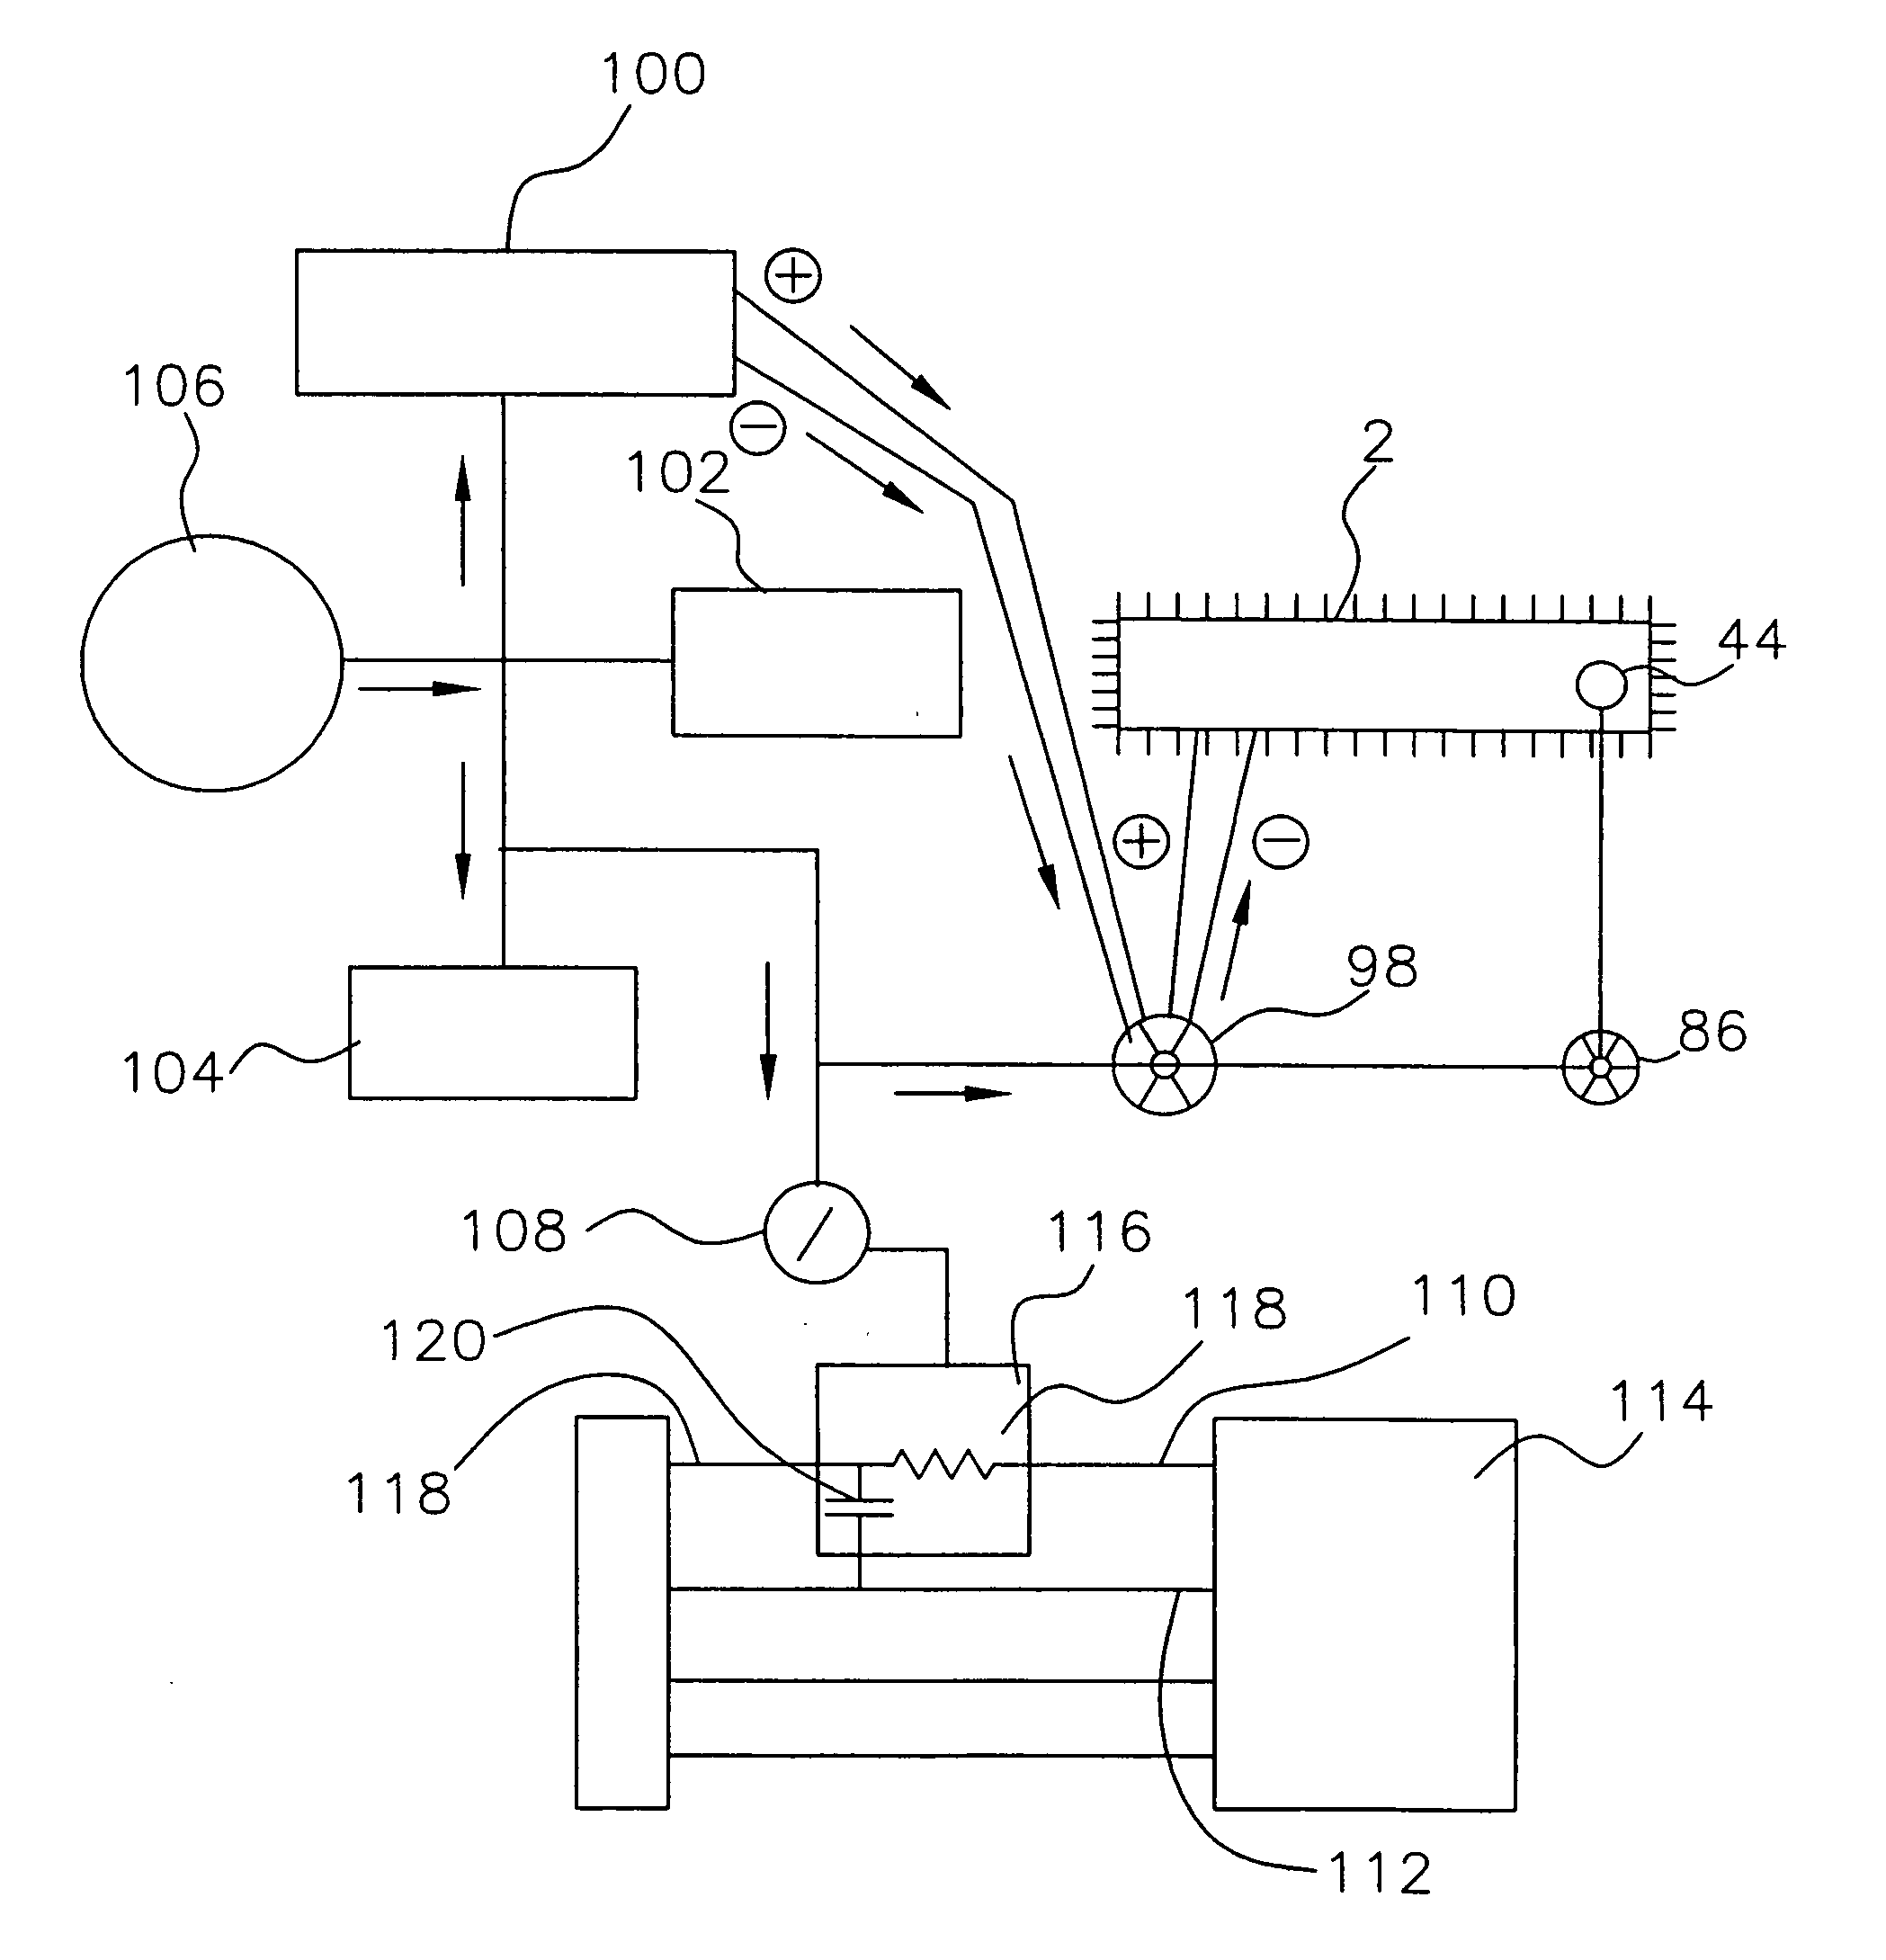 Hydrogen generator for uses in a vehicle fuel system